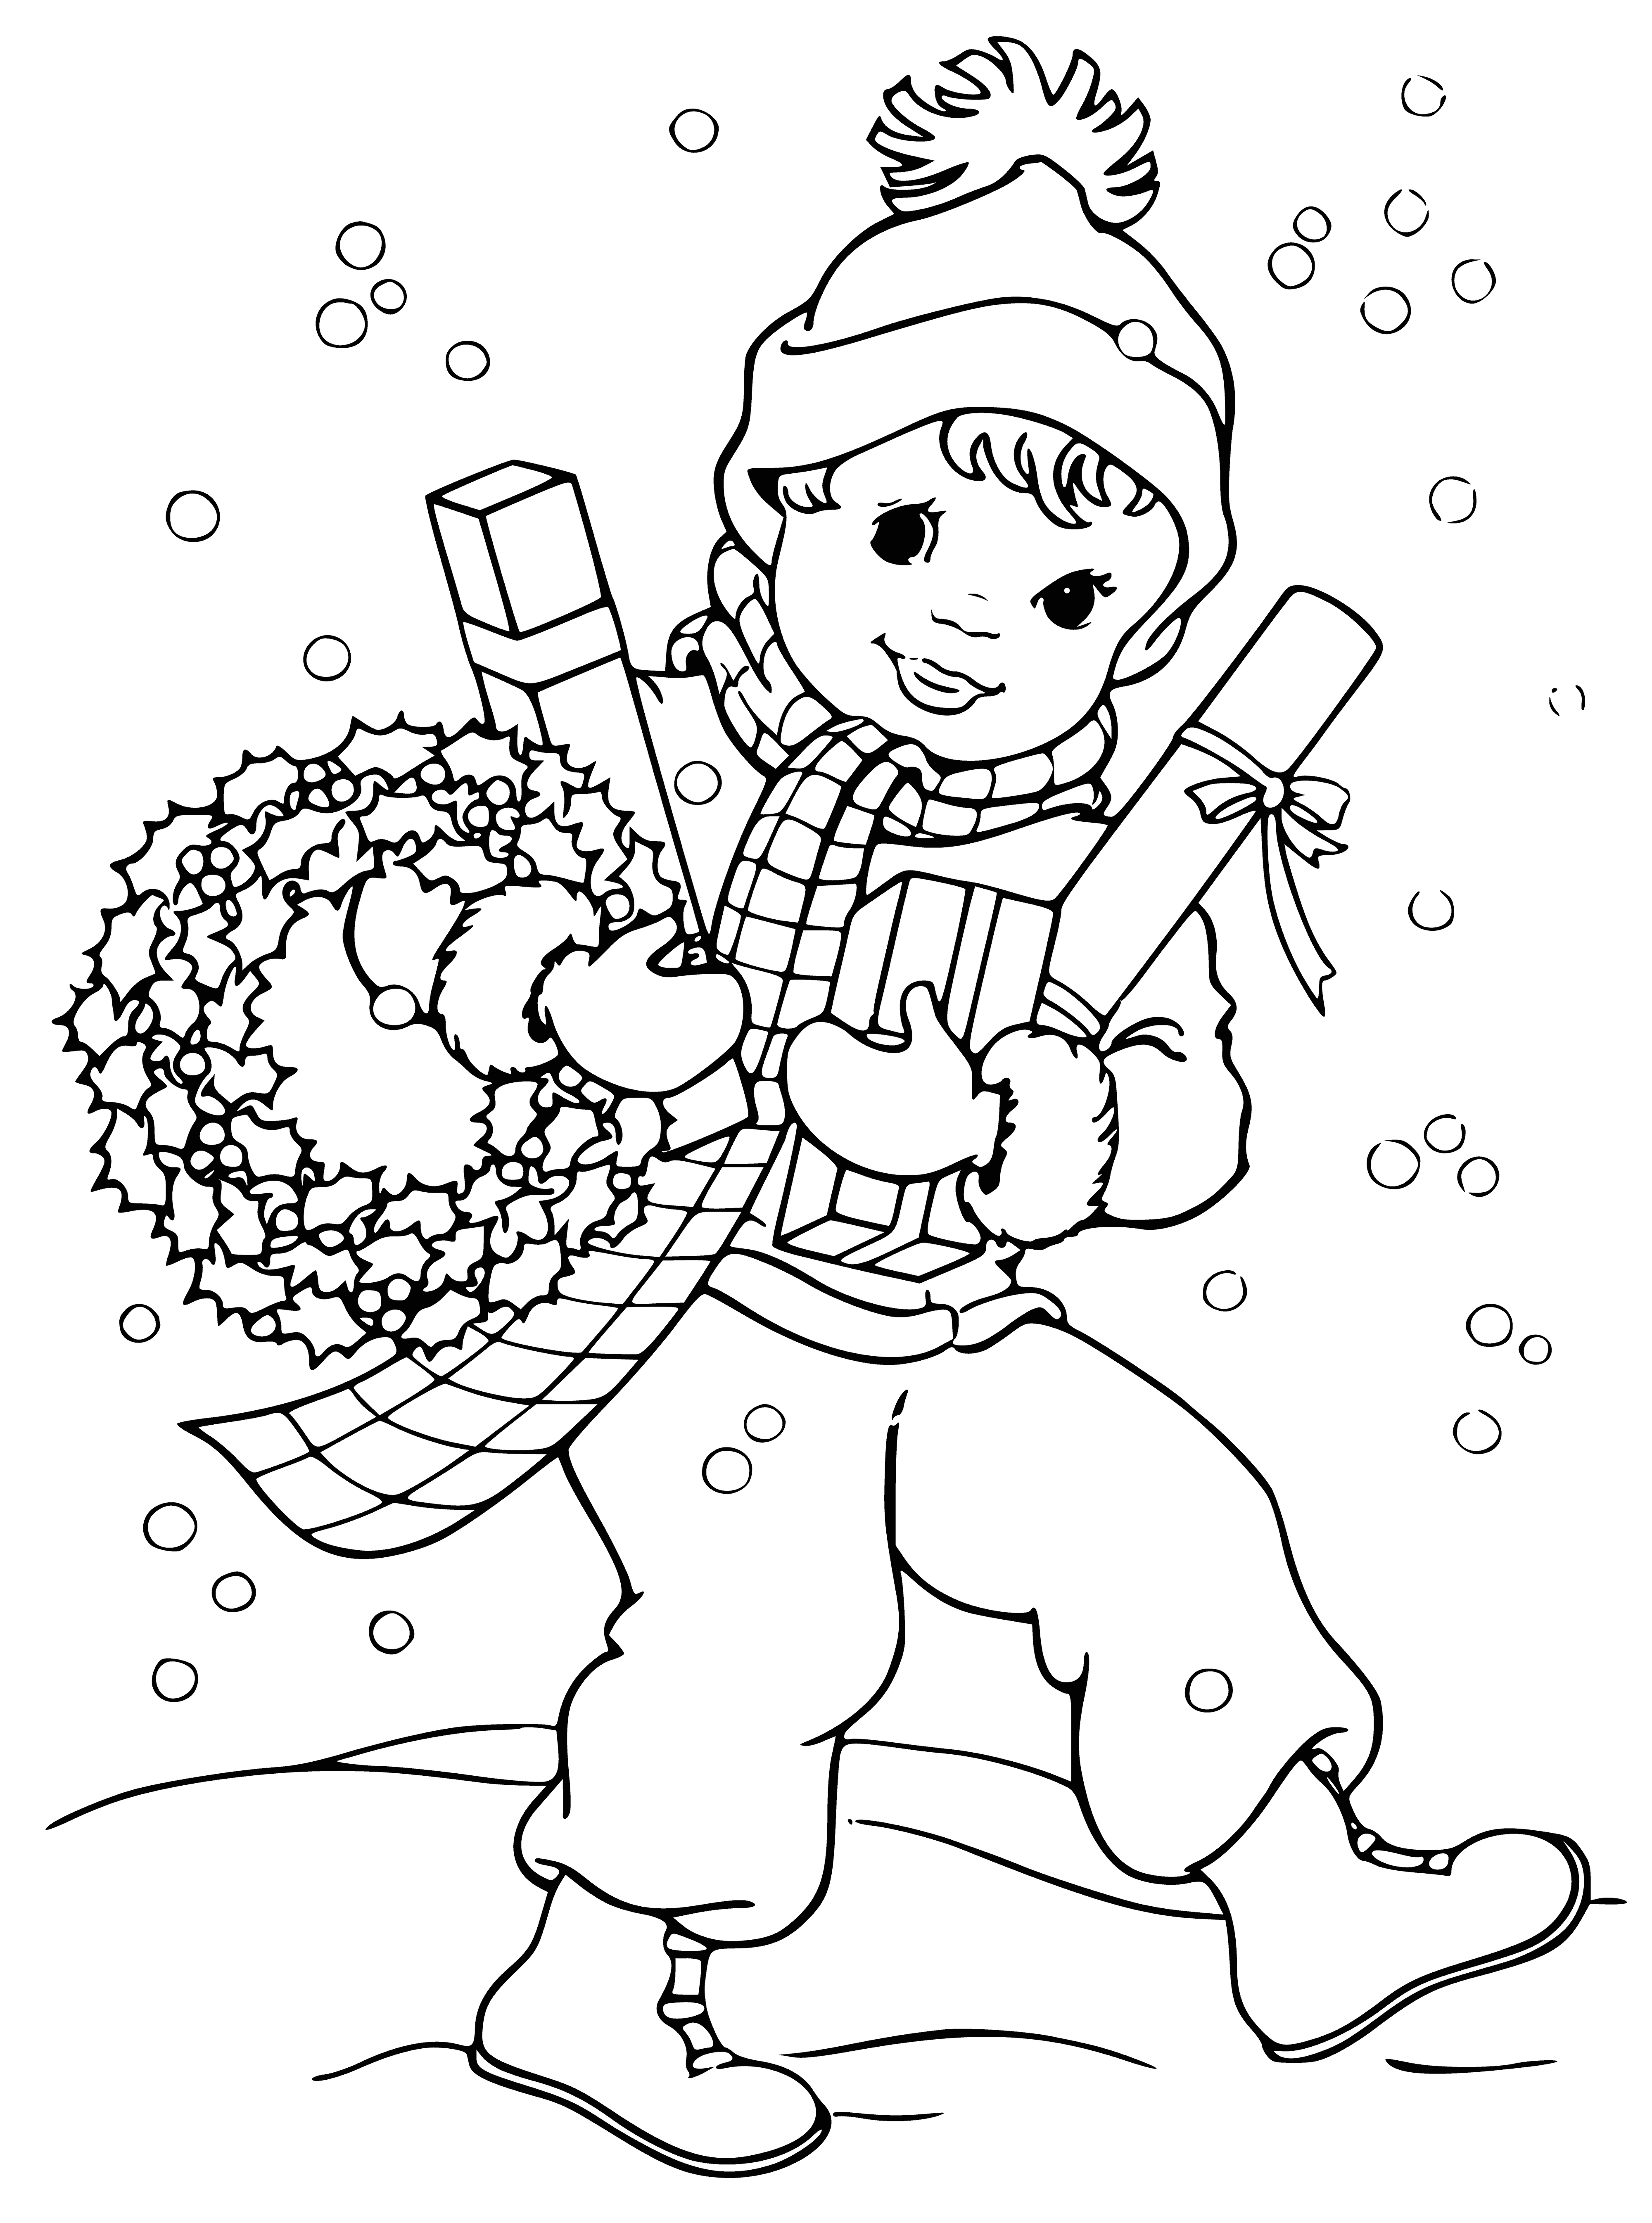 coloring page: Young boy, ~6/7, kneels by tree wearing Santa hat, surrounded by gifts. Big smile, excited for Christmas.